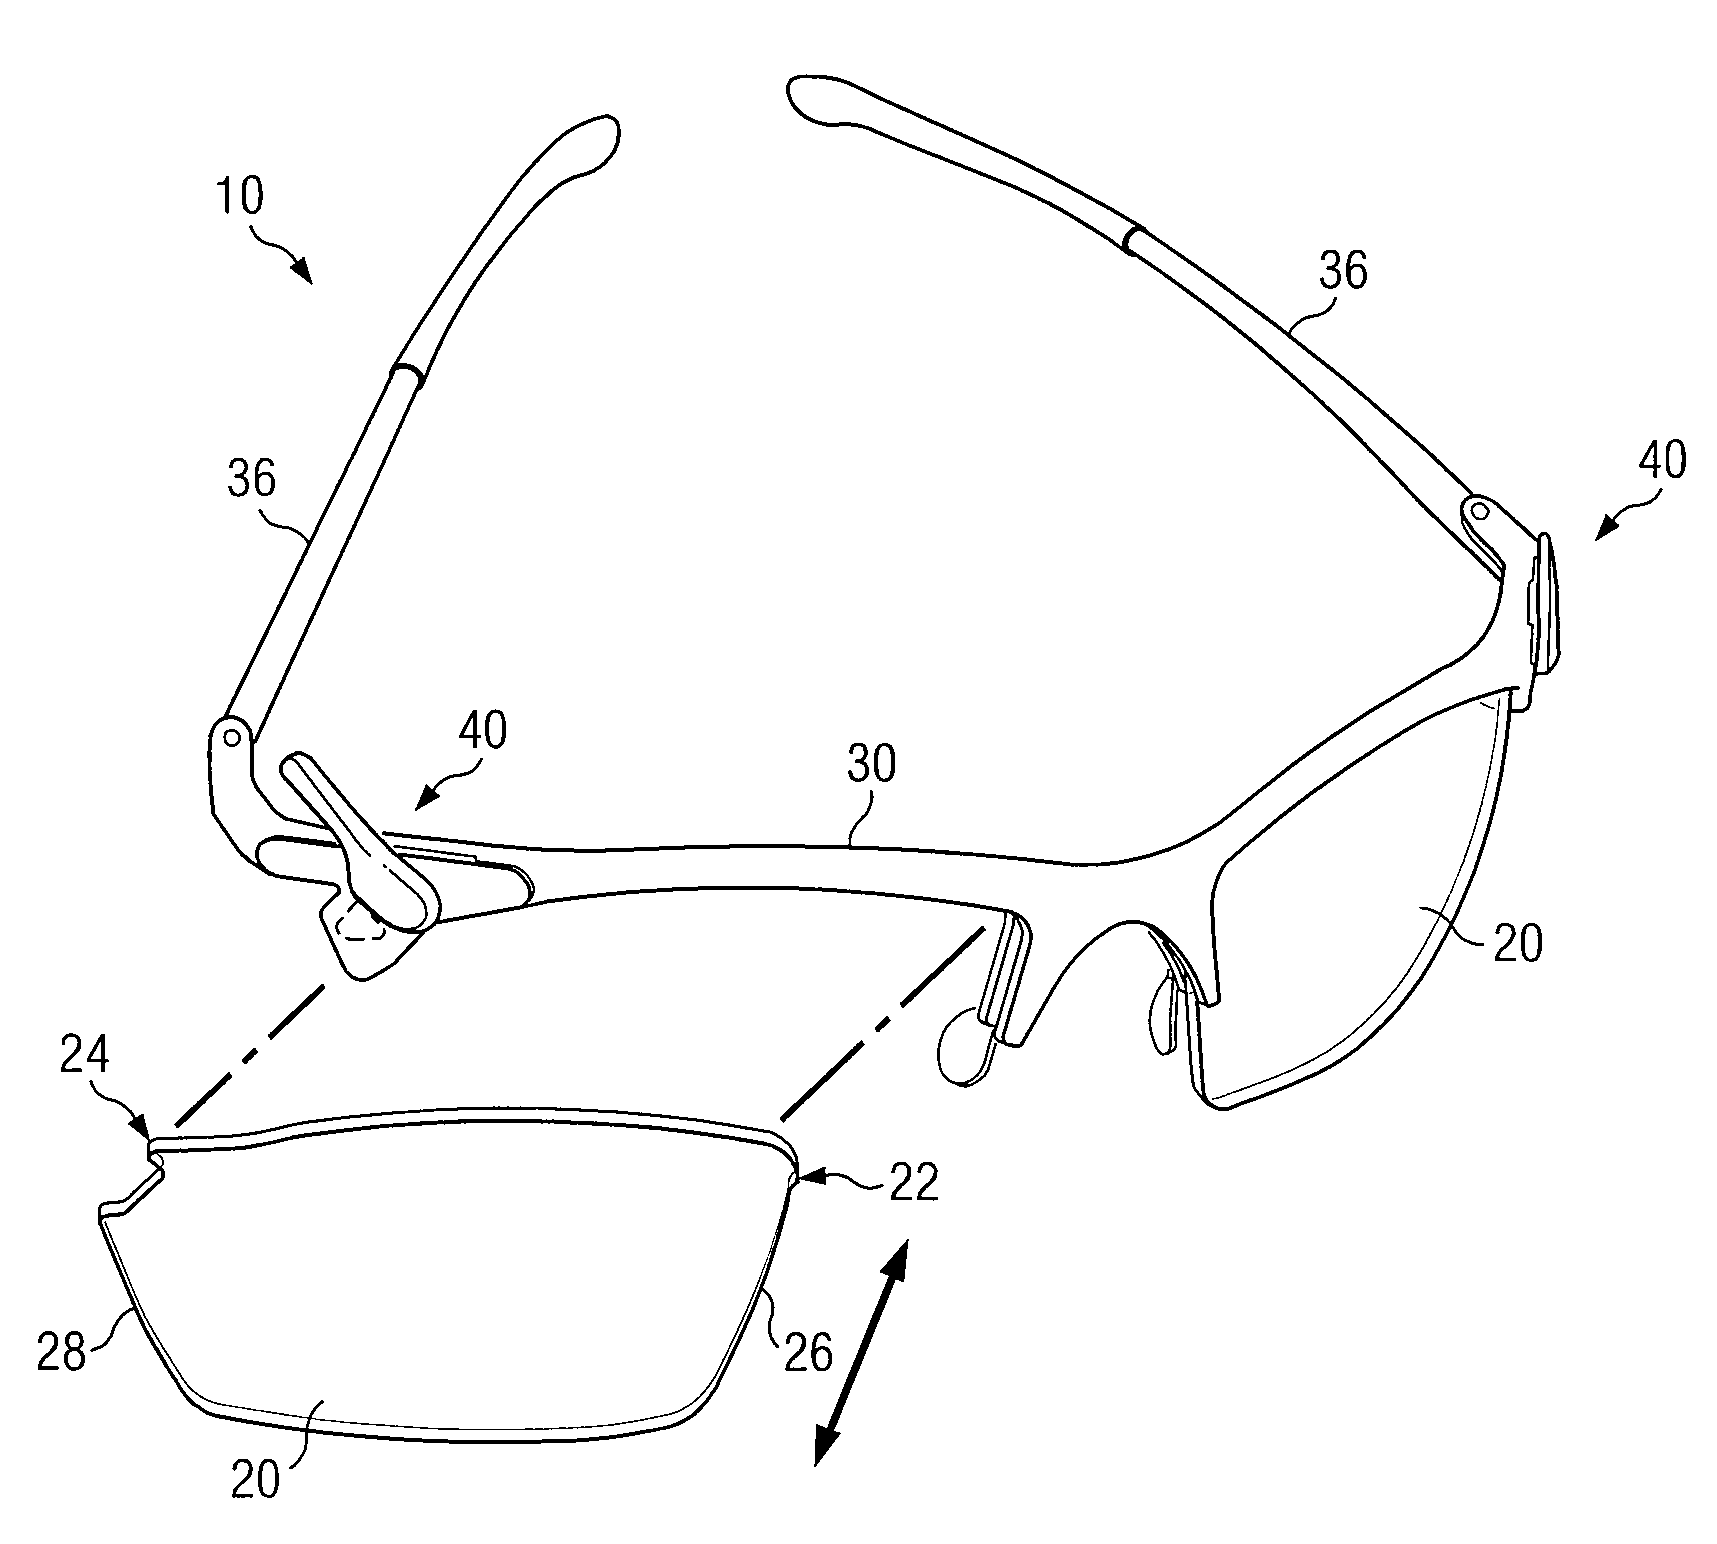 Partially Entrapped Frame Having a Removable Lens